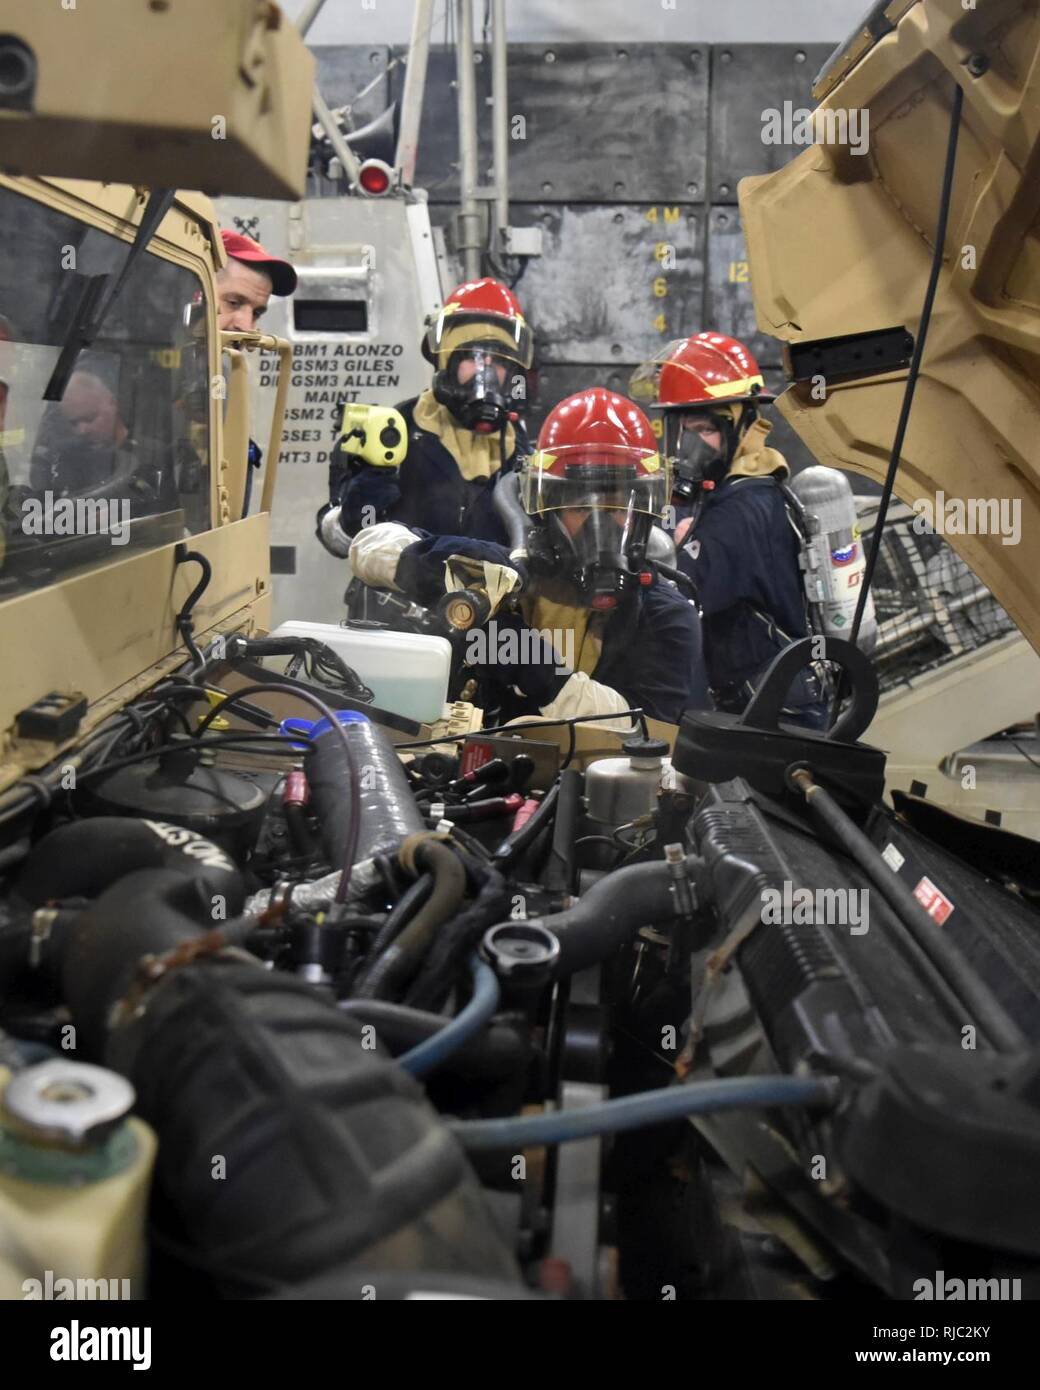 PACIFIC OCEAN (Nov 1, 2016) A firefighting team simulates fighting an engine fire in a vehicle aboard the amphibious transport dock ship USS Somerset (LPD 25). Somerset, part of the Makin Island Amphibious Ready Group, is operating in the U.S. 7th Fleet area of operations, with the embarked 11th Marine Expeditionary Unit, in support of security and stability in the Indo-Asia-Pacific region. Stock Photo